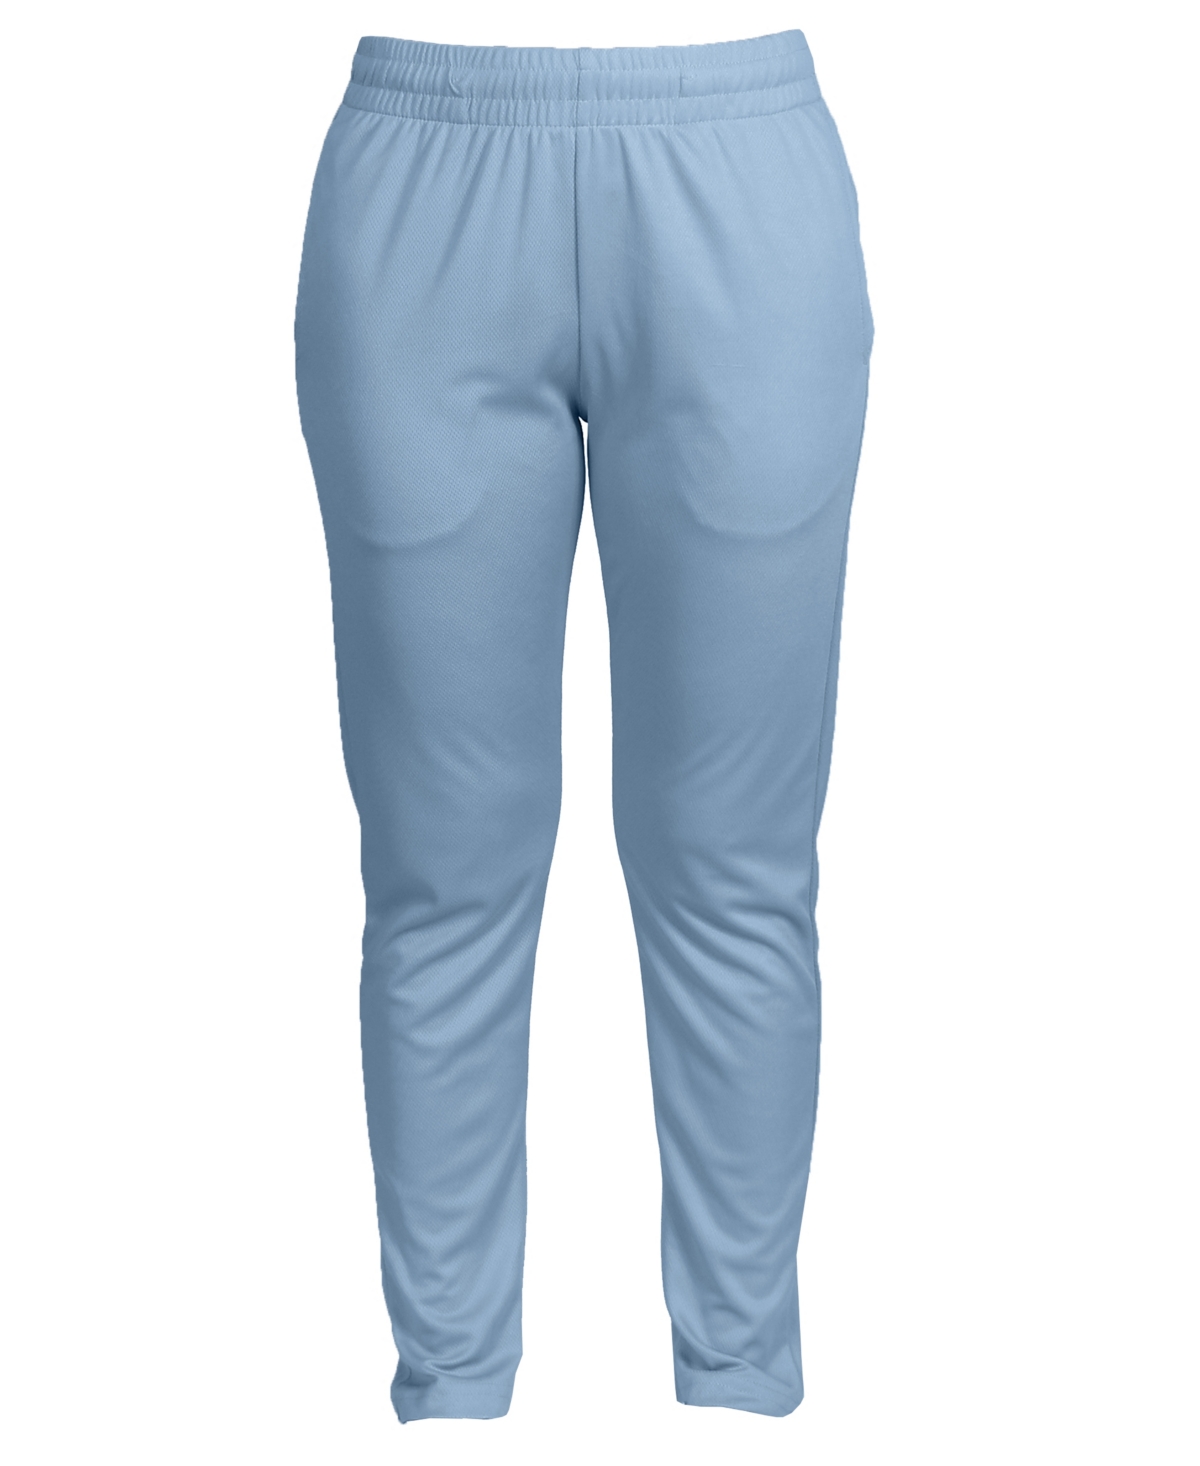 Galaxy By Harvic Men's Dry Fit Moisture Wicking Performance Active Pants In Light Blue